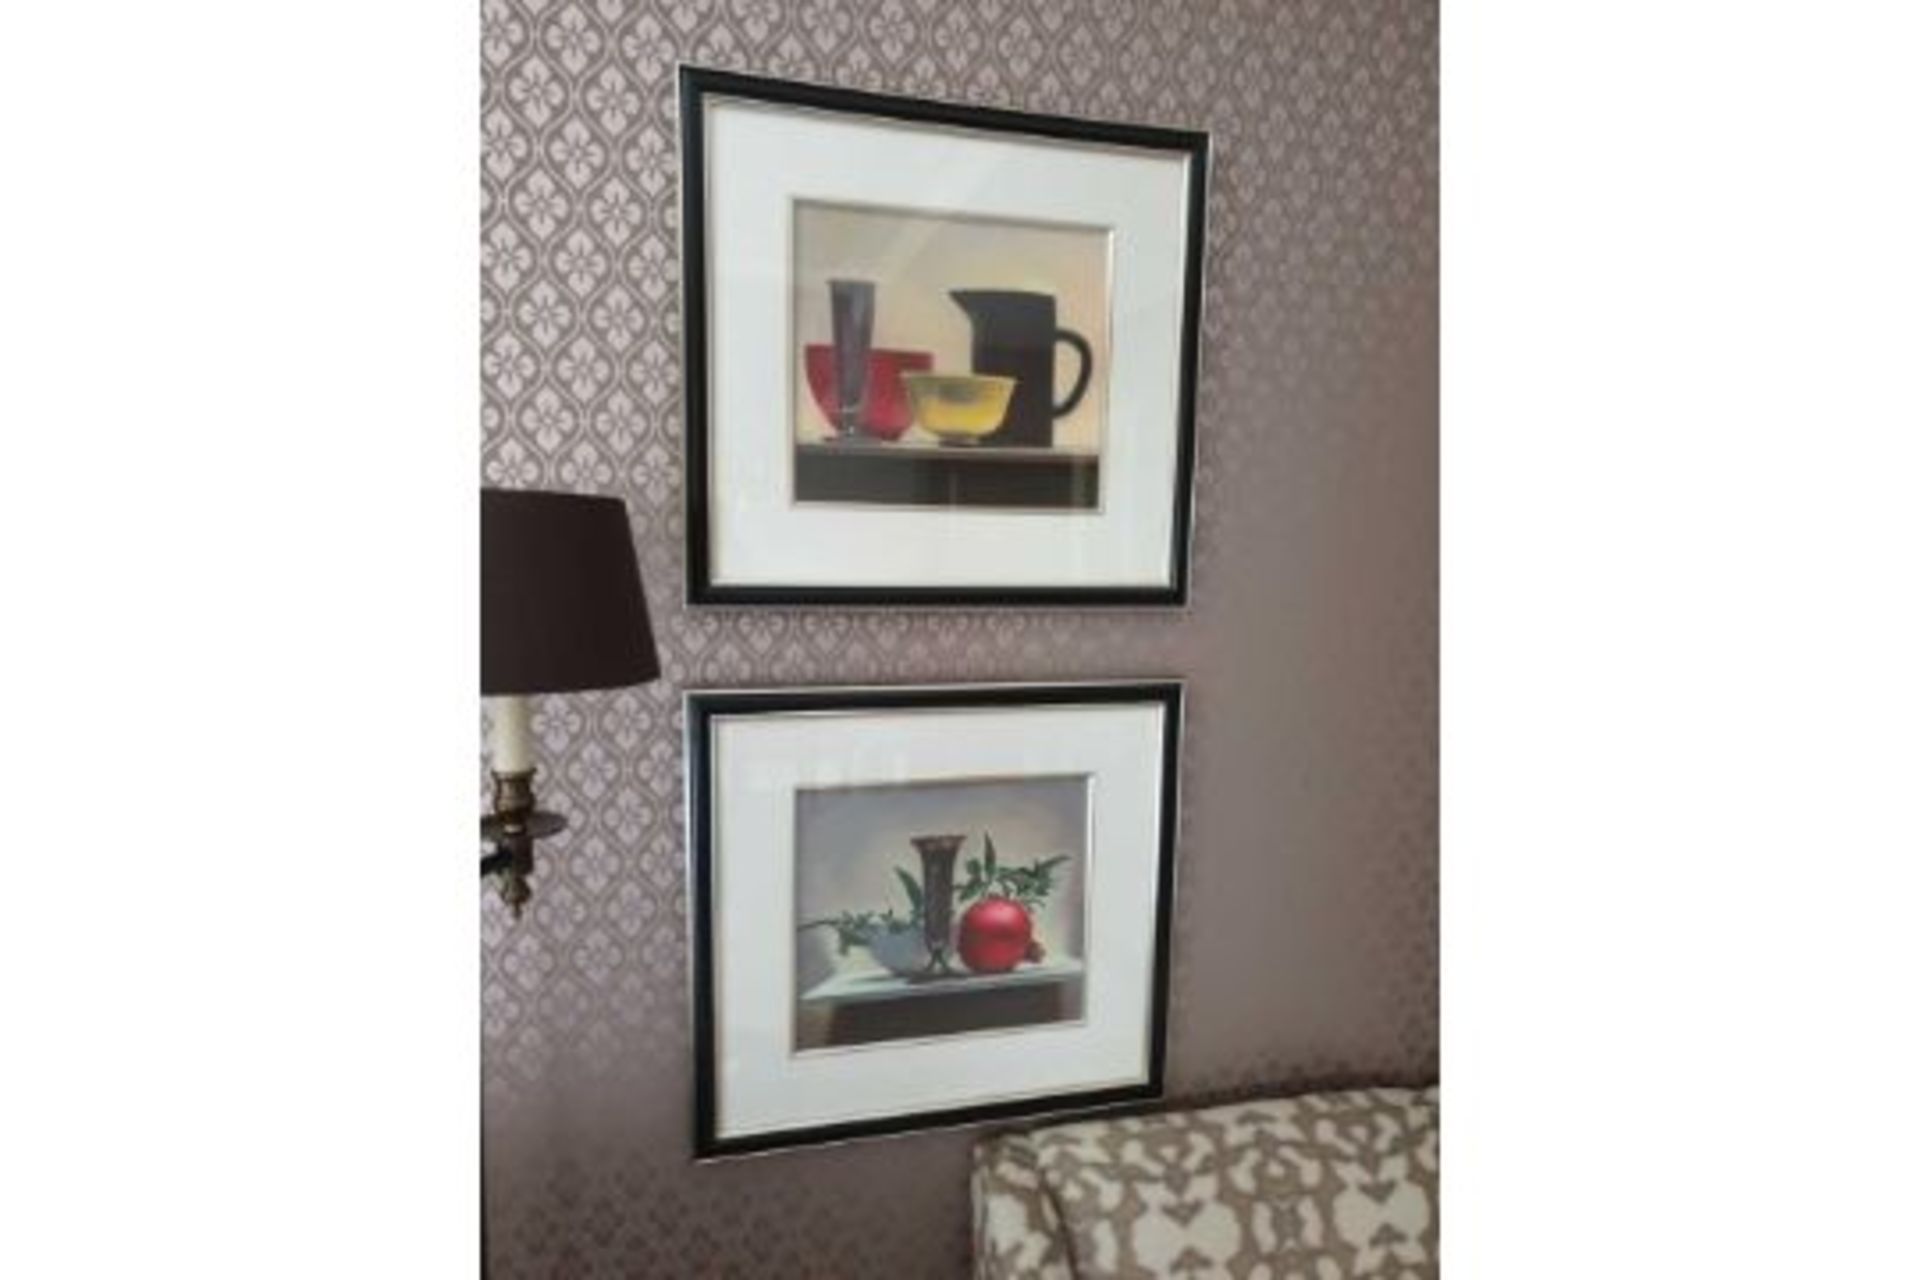 A Pair Of Untitled Framed Still Life Lithograph Prints 60 x 50cm